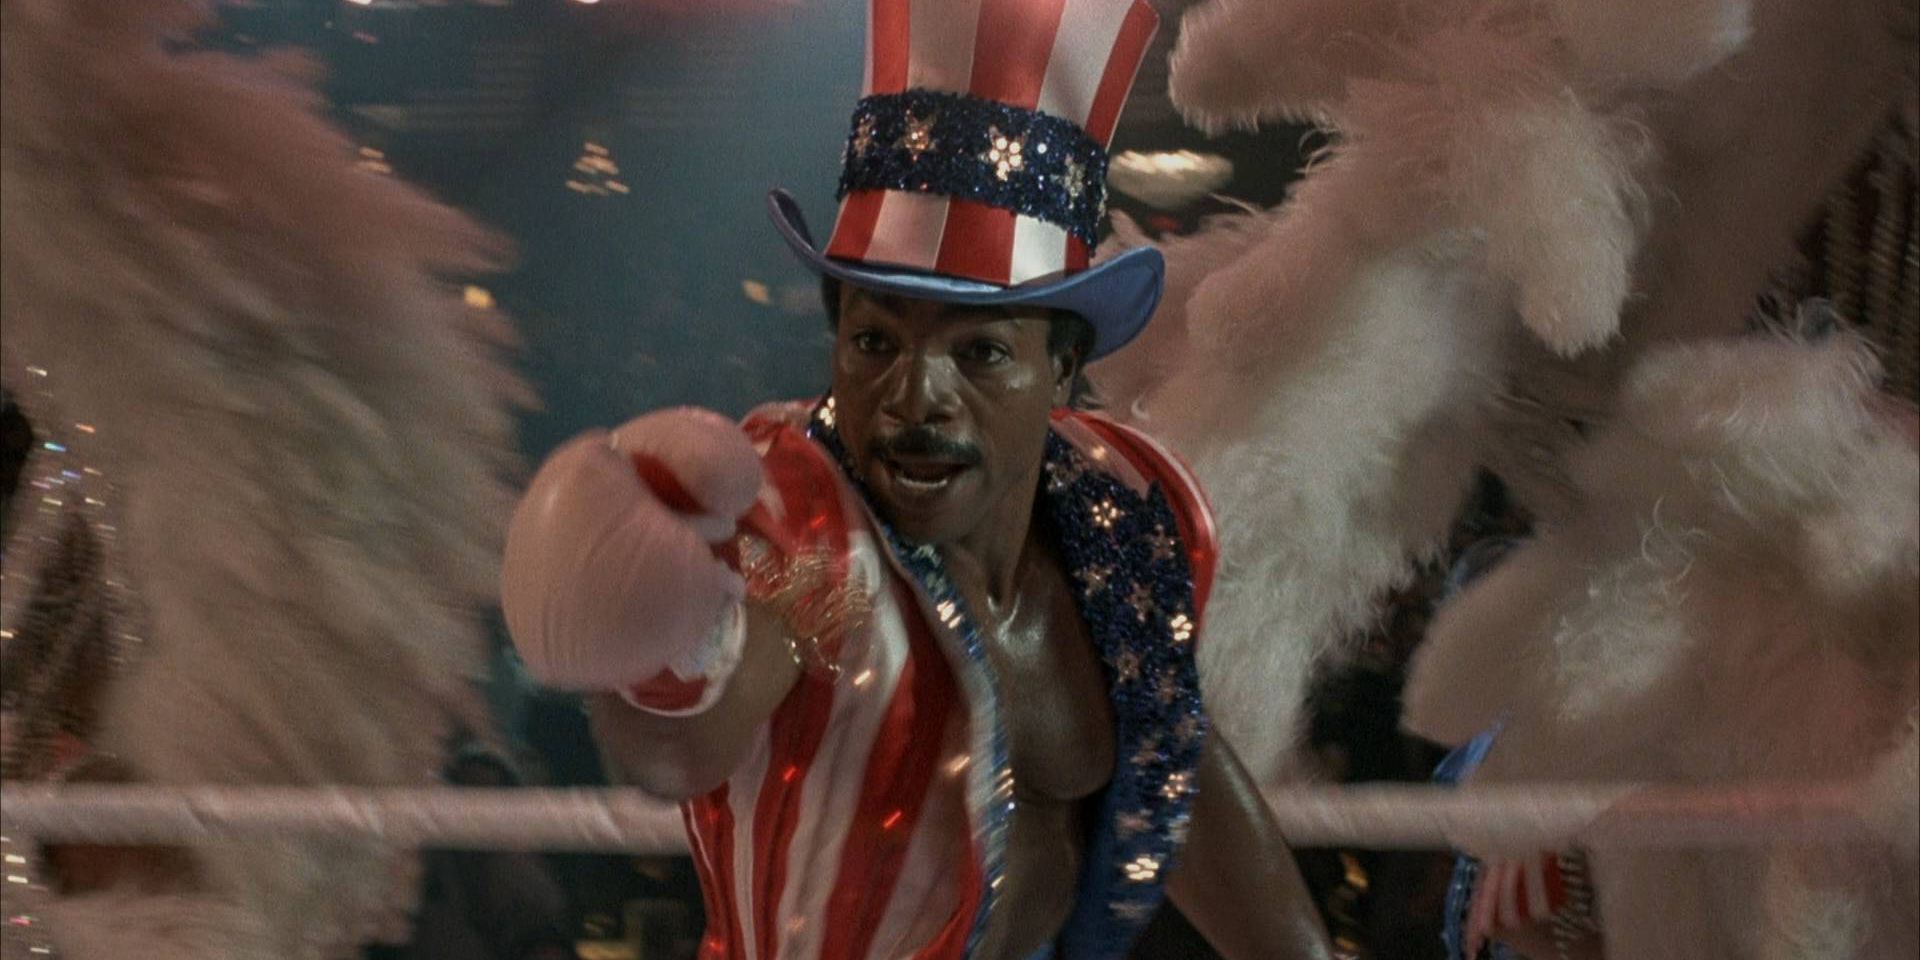 Carl Weathers as Apollo Creed showboating in the ring